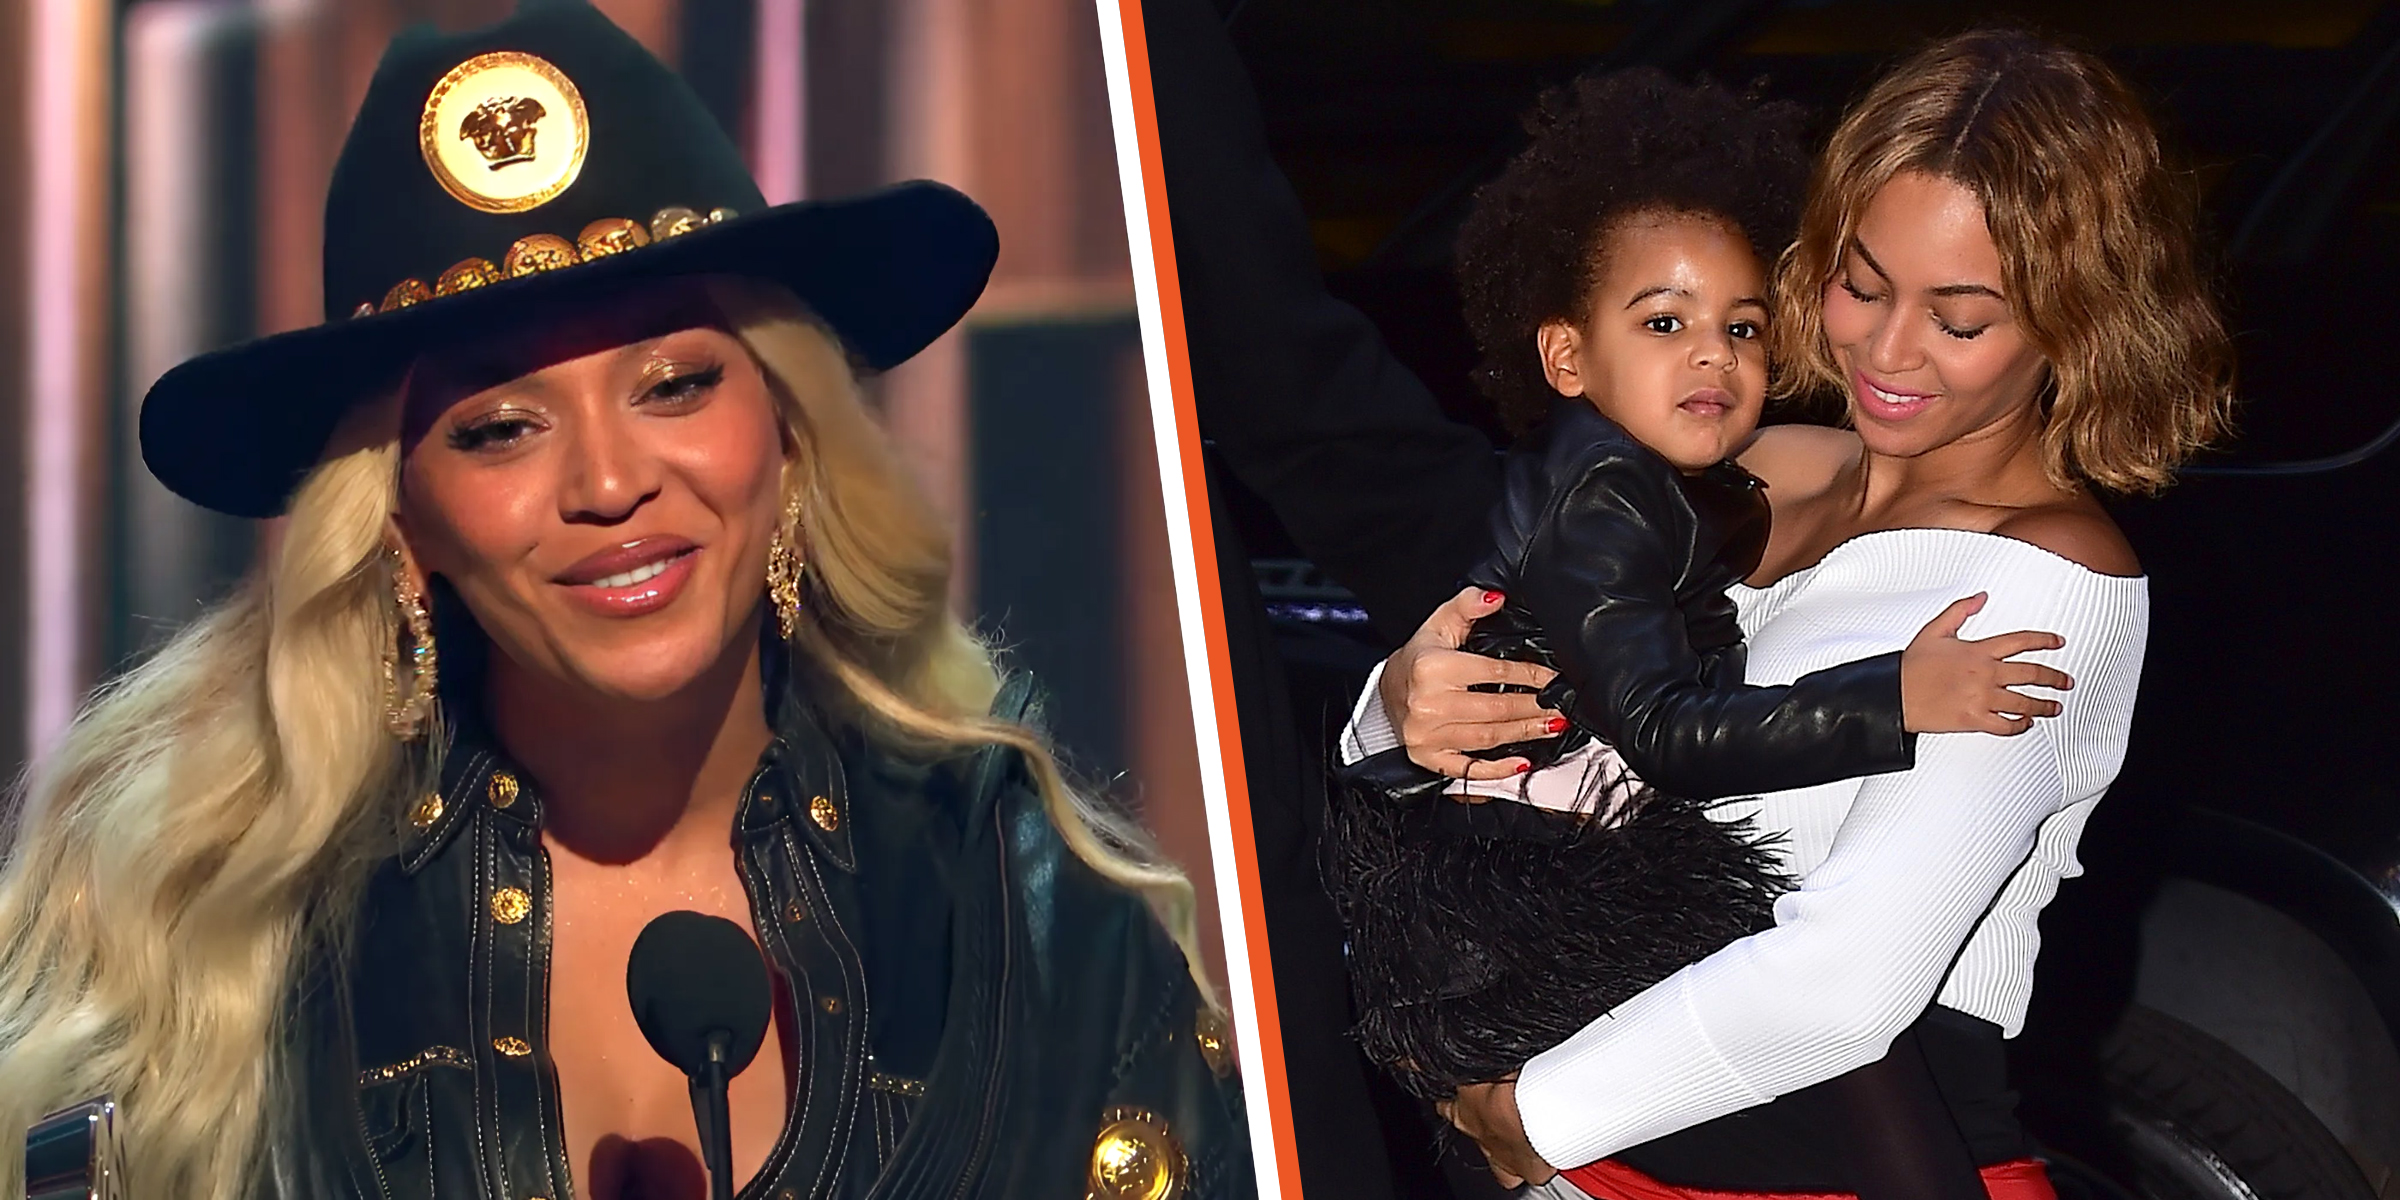 Beyoncé | Beyoncé and Blue Ivy Carter | Source: YouTube/iHeartRadio | Getty Images